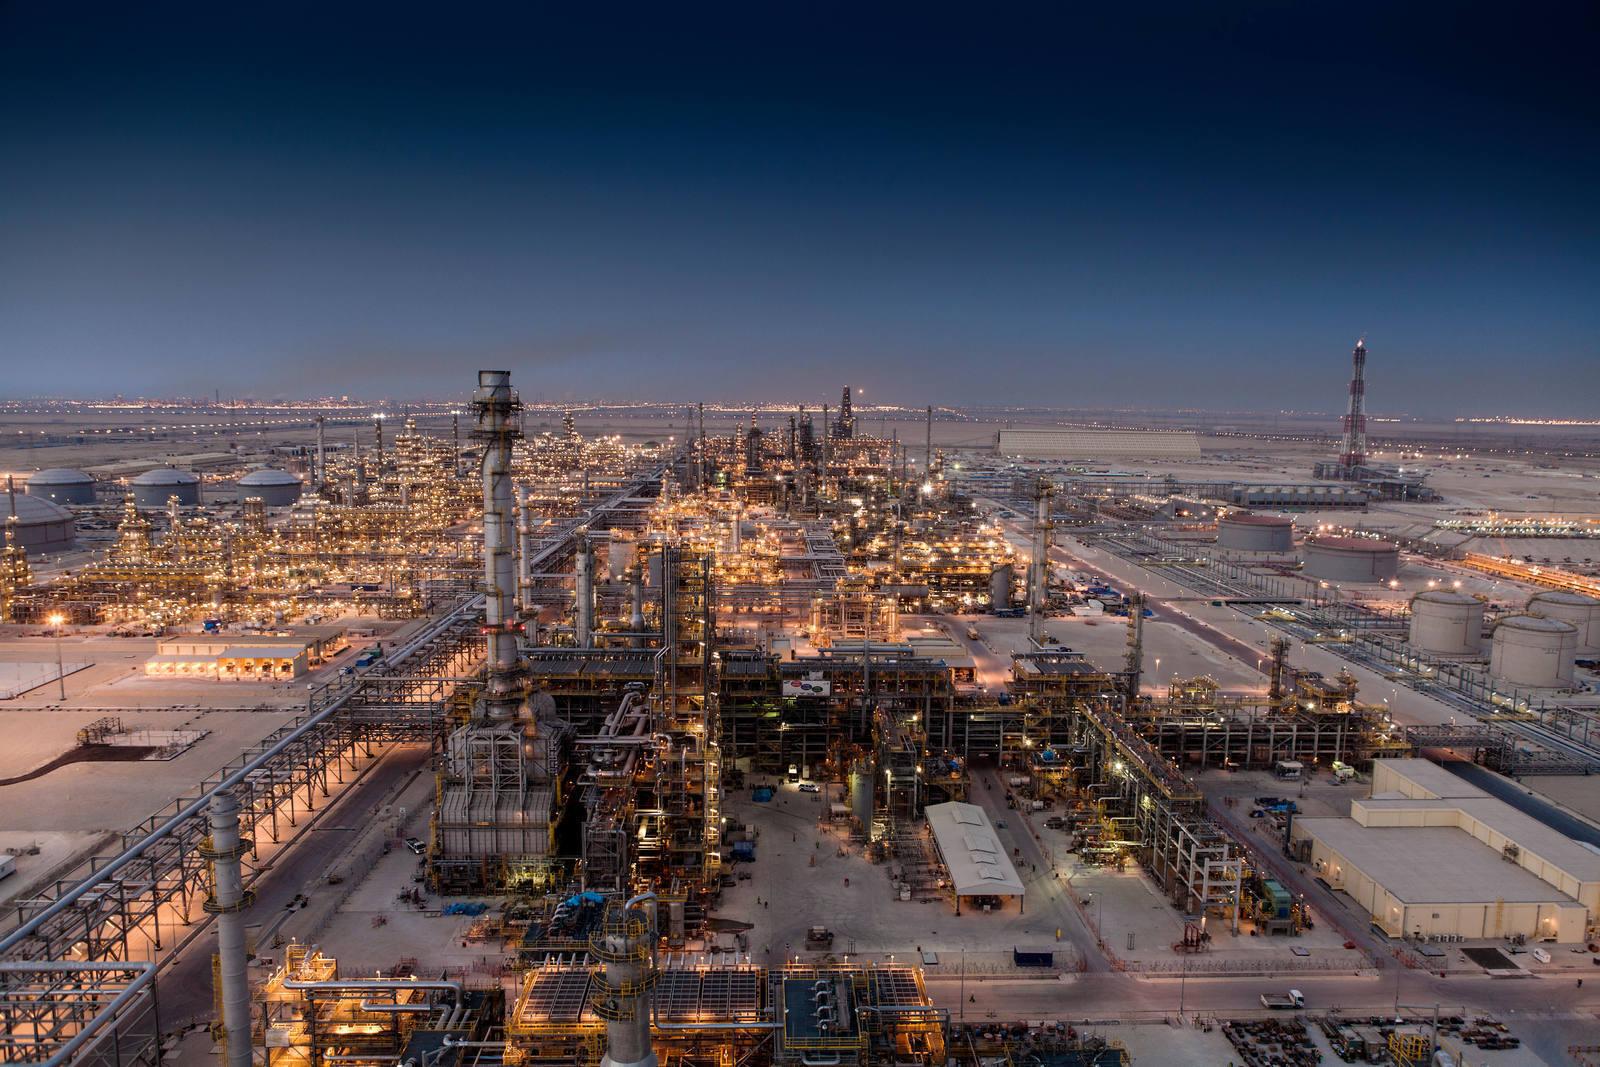 View from the top of the paraxylene distillation tower. Refinery of Jubail, Saudi Arabia.